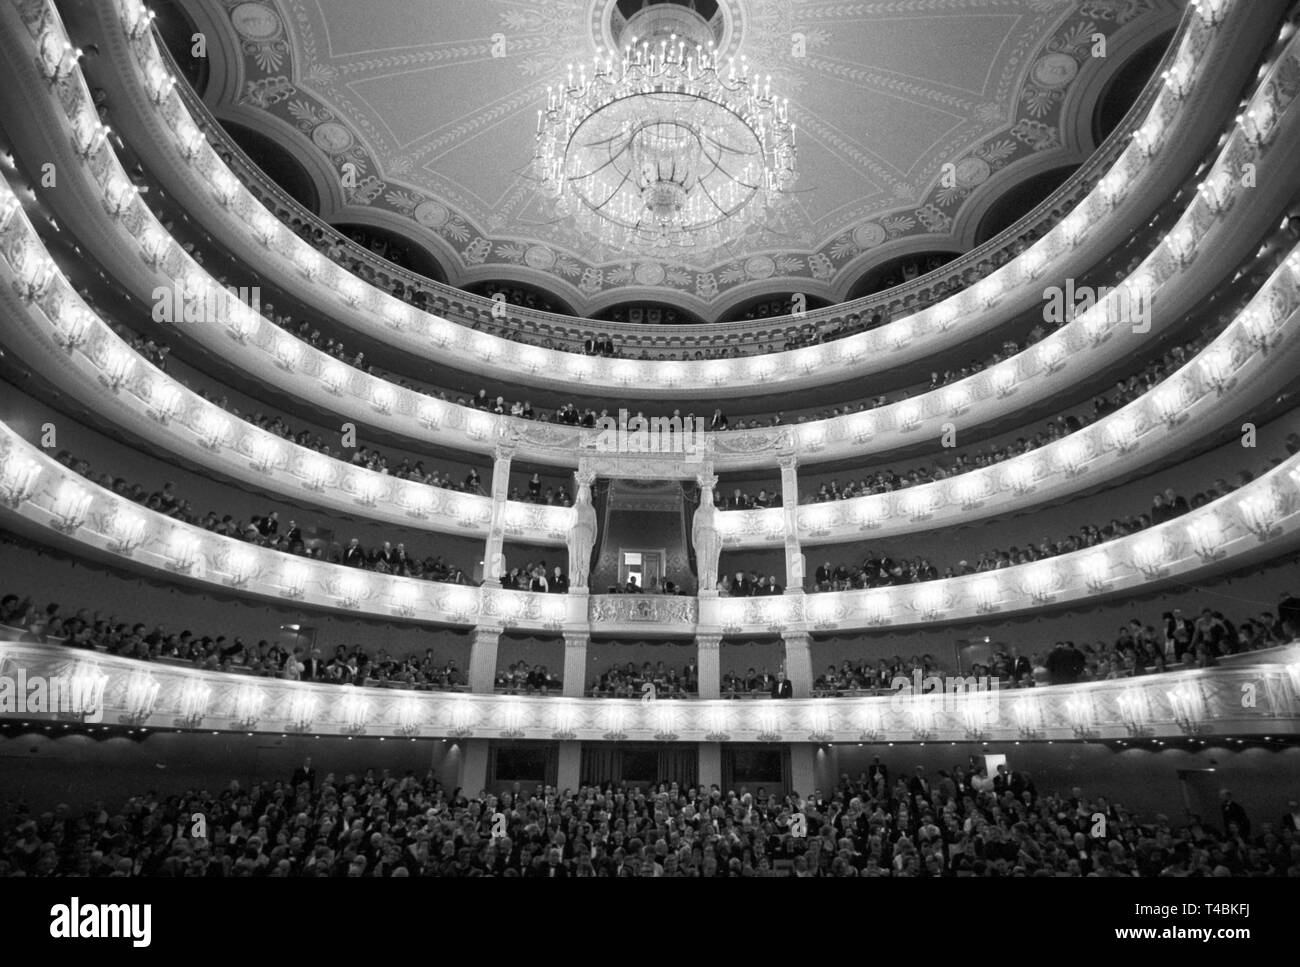 The second performance of the 'Mastersingers of Nuremberg' by Wagner in the re-built and re-opened National Theatre in Munich takes place for roughly 1,800 citizens on the 29th of November in 1963. The picture shows a view into the auditorium and the orchestra pit. | usage worldwide Stock Photo